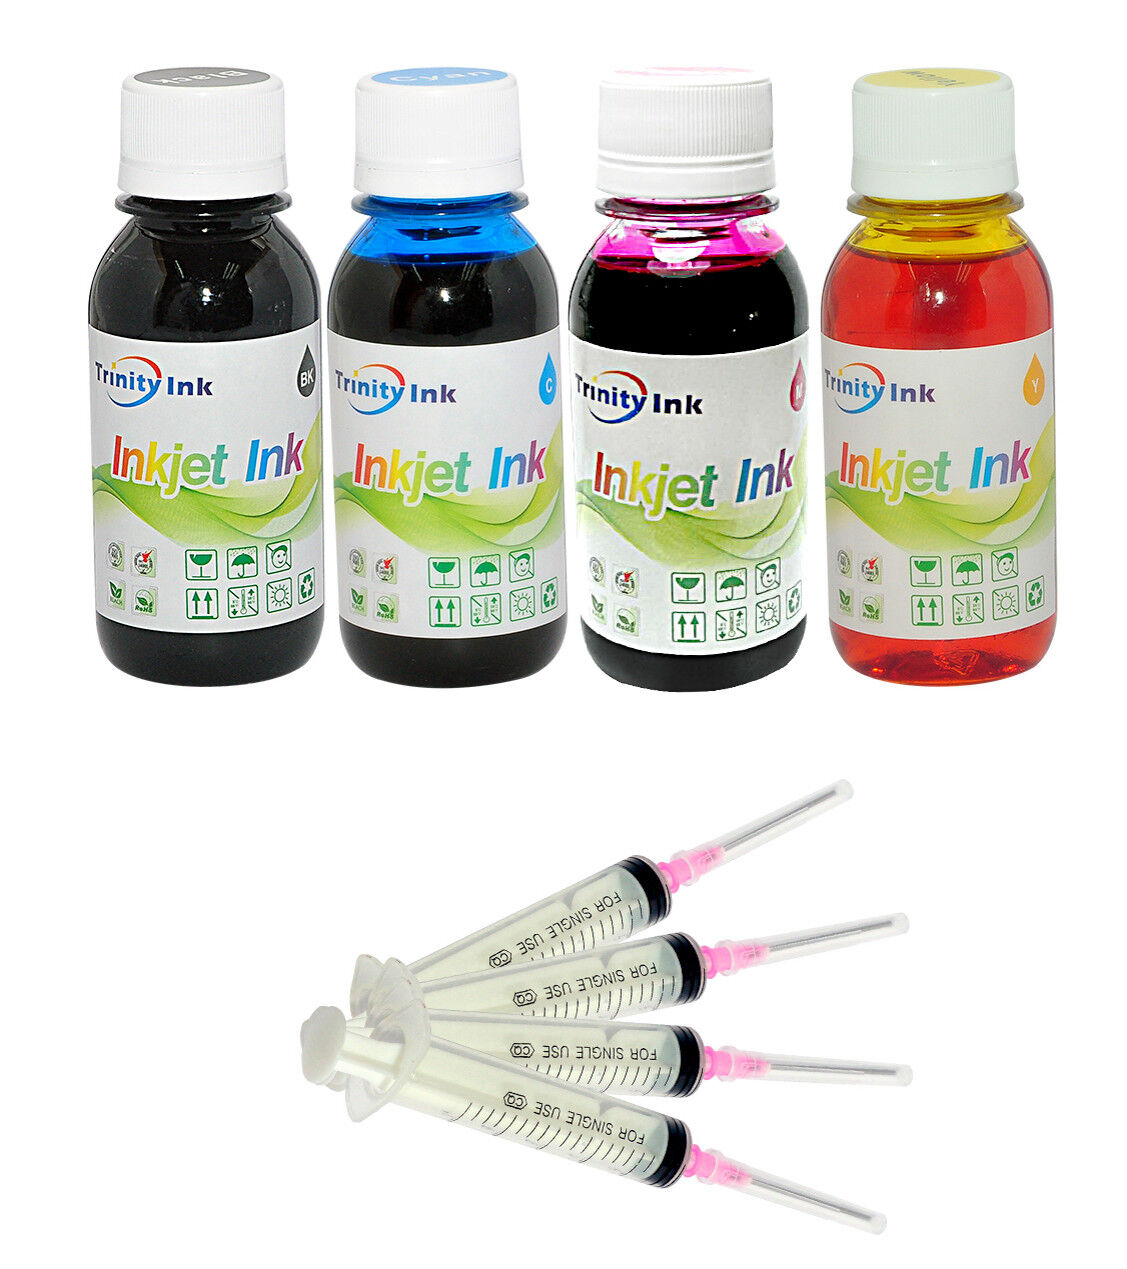 4x100ml Ink refill kit for HP 64 64XL cartriges